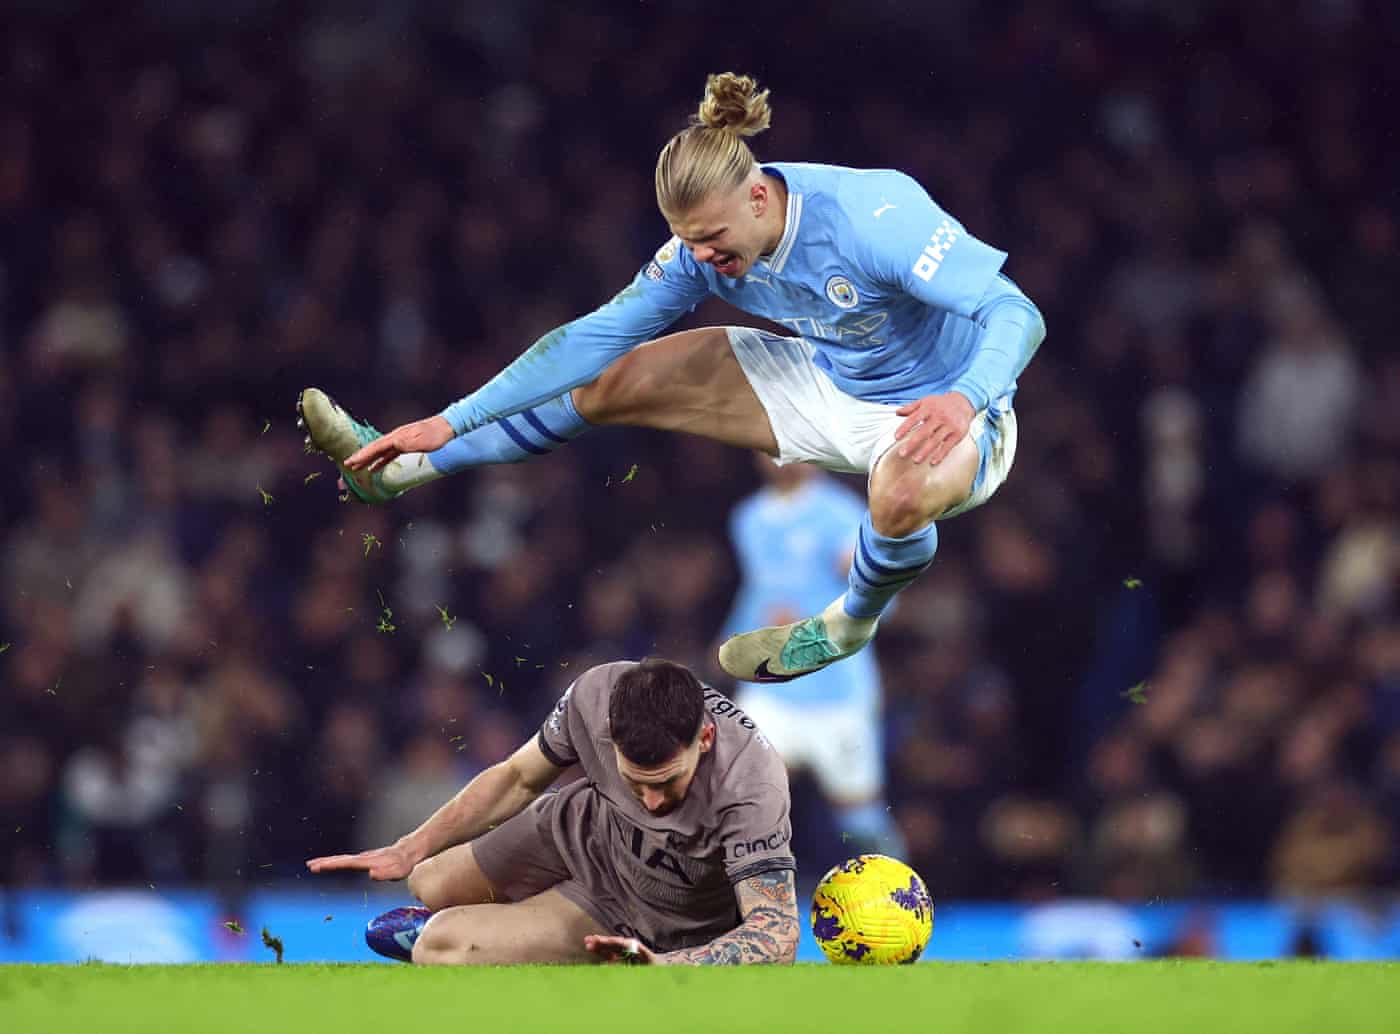 Pierre-Emile Hobjerg was top-class against Manchester City.